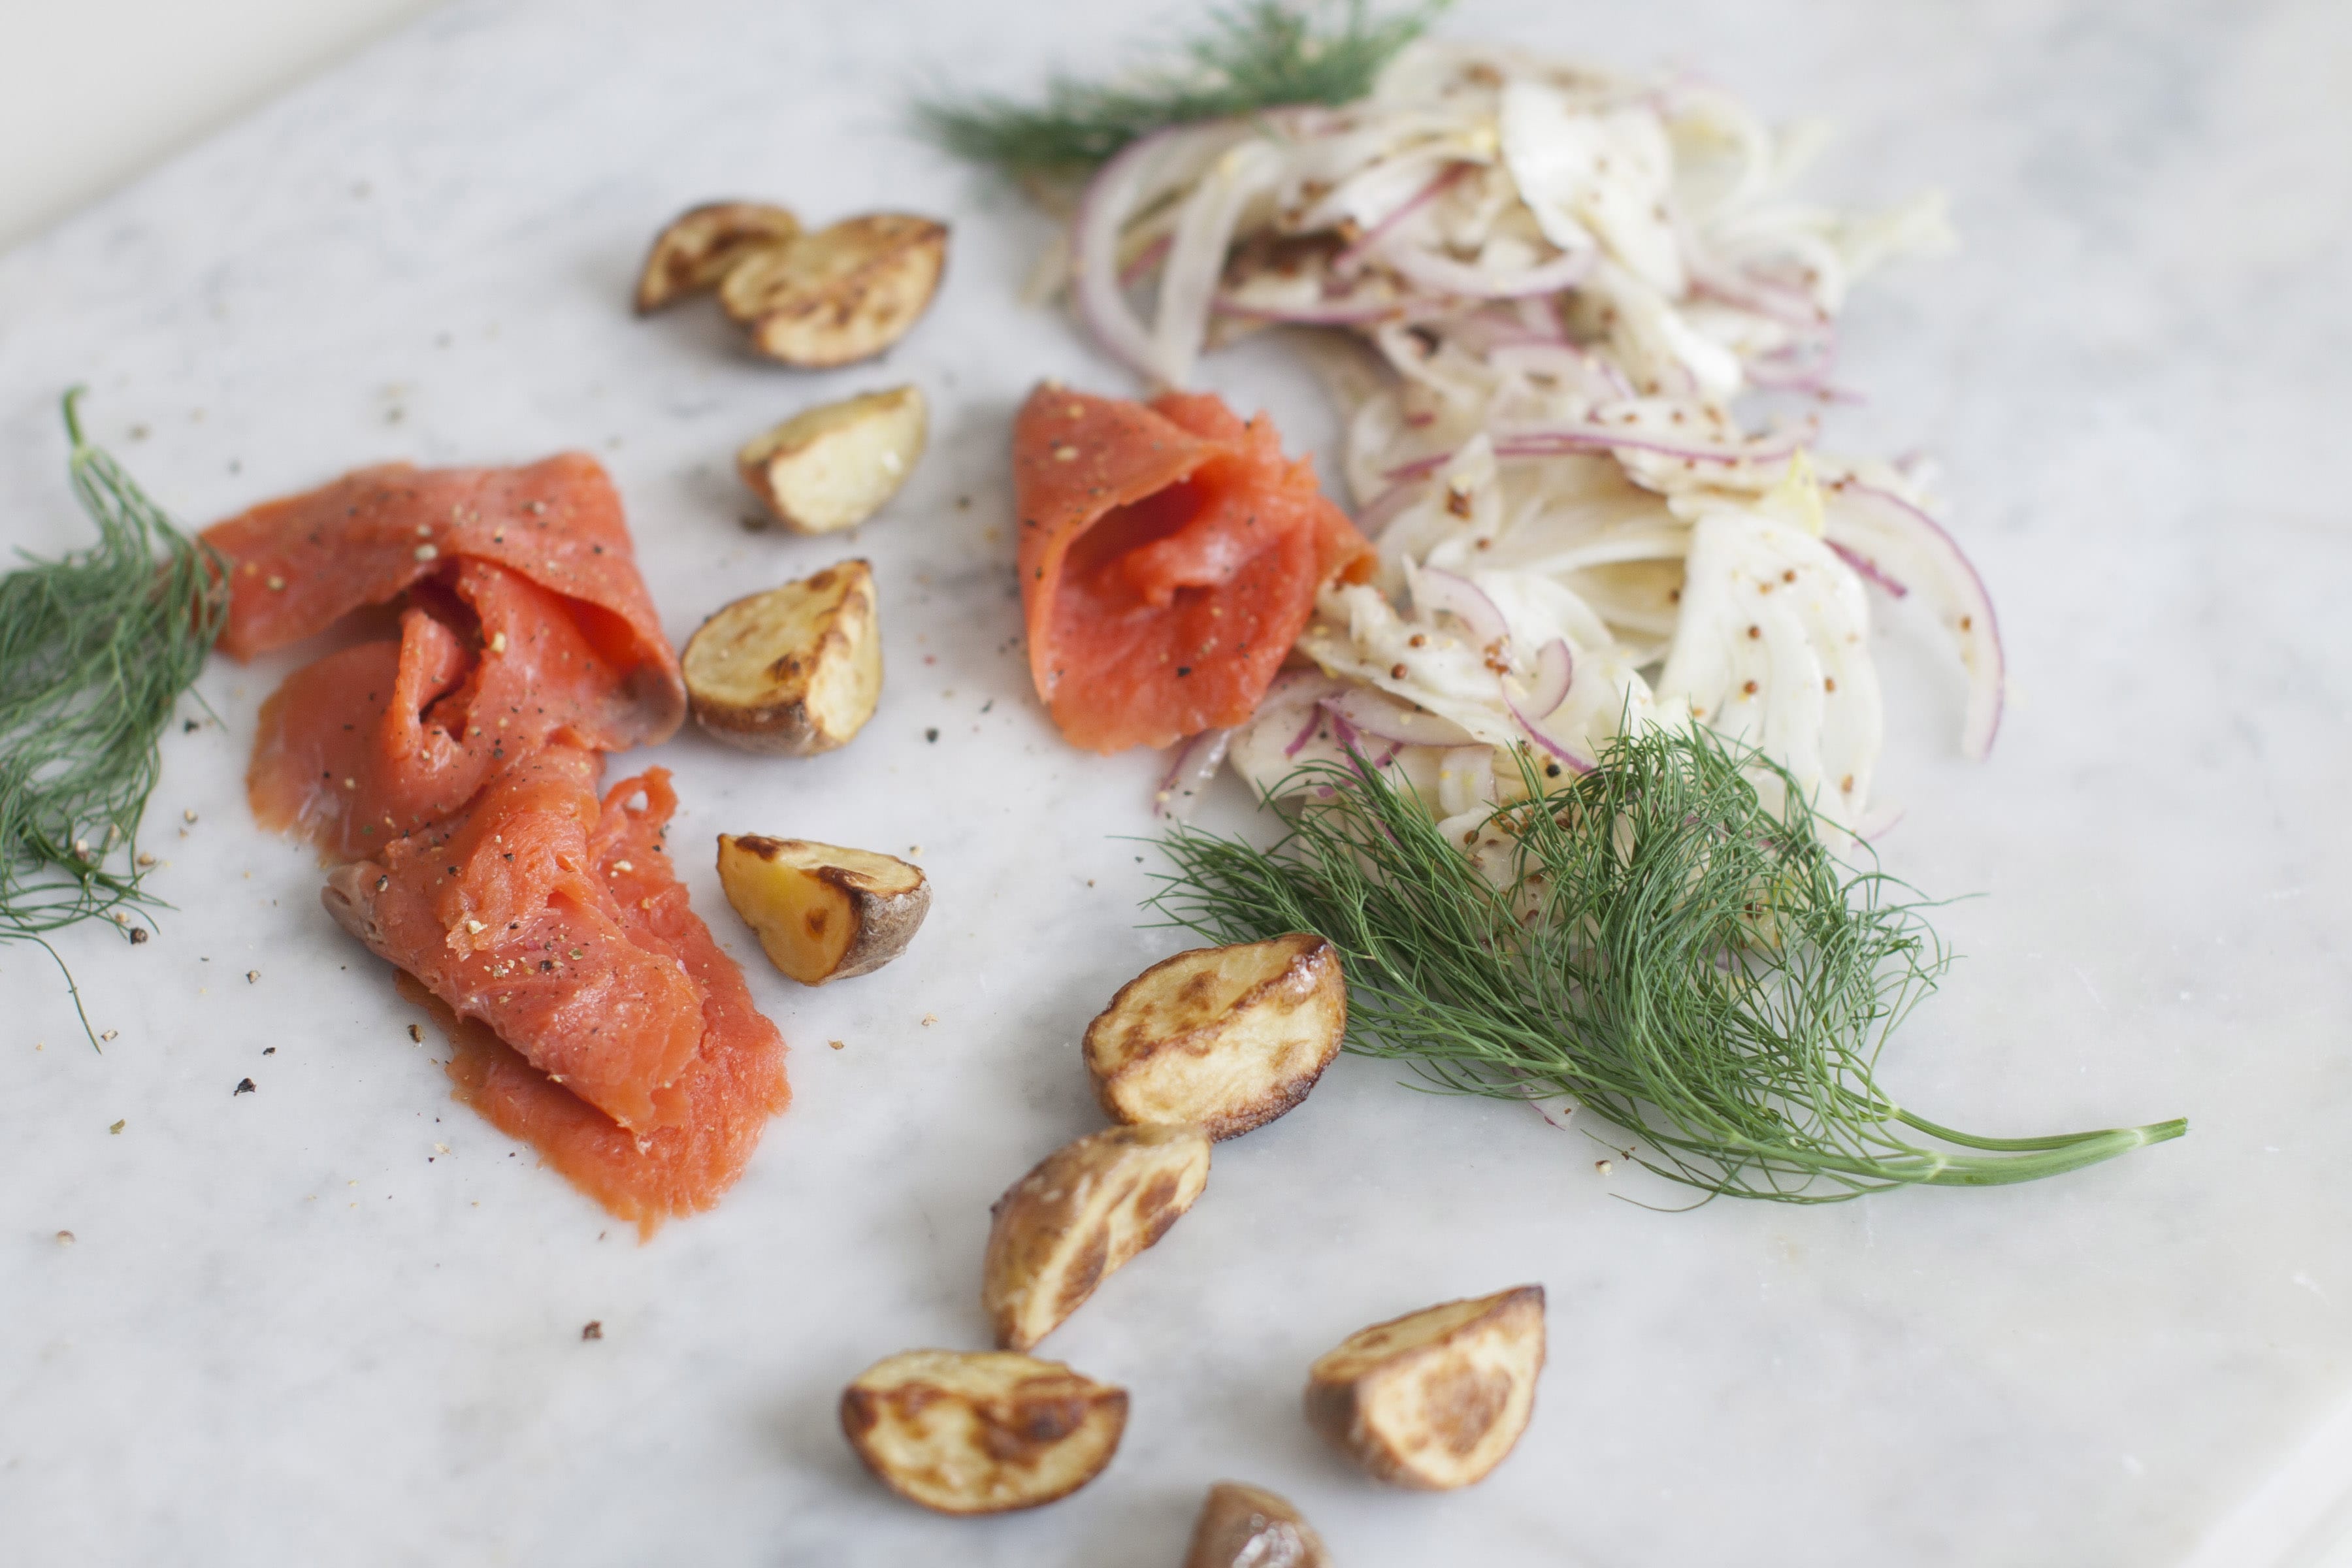 The ingredients for this salad are so simple: shaved fennel and red onion, a light dressing, thinly sliced smoked salmon, new potatoes, oil and black pepper.